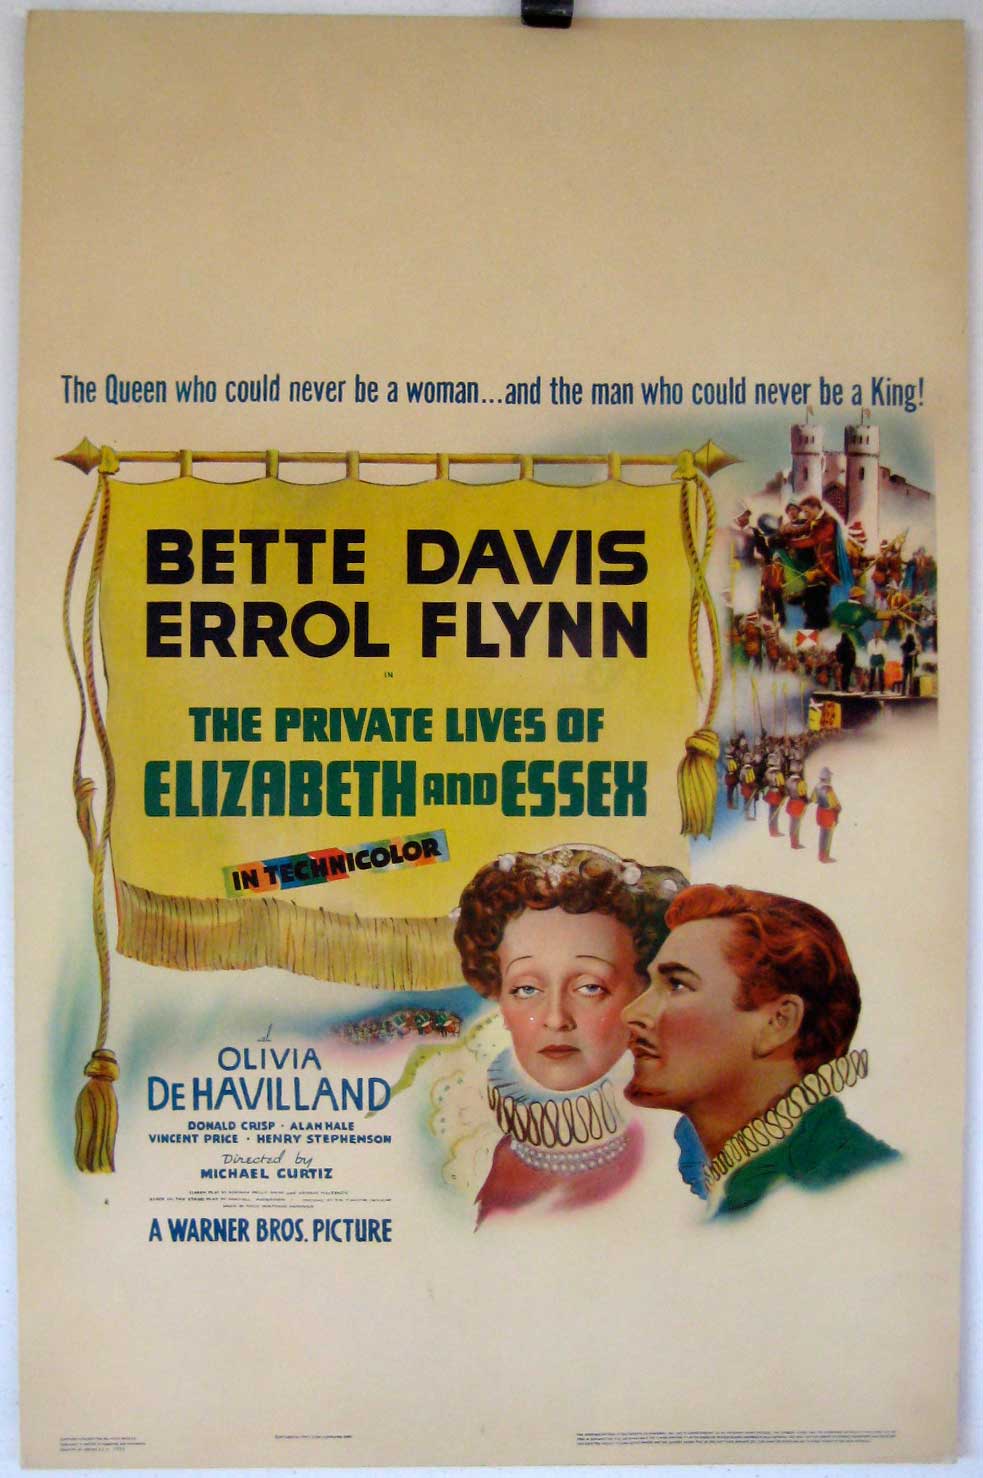 PRIVATE LIFE OF ELIZABETH AND ESSEX, THE